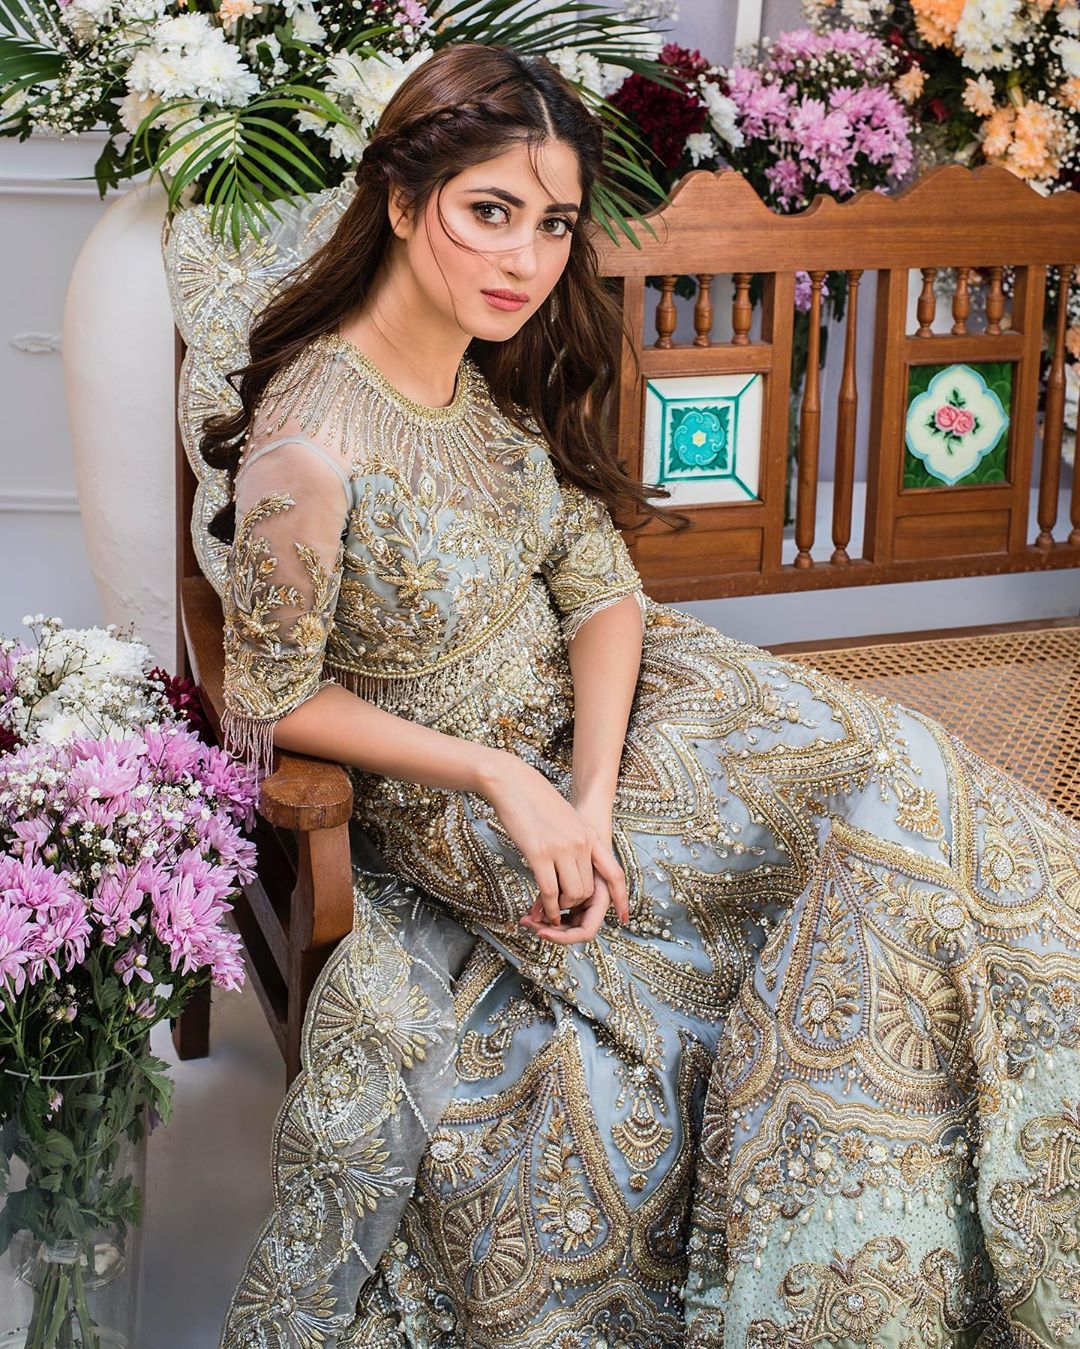 Beautiful Sajal Ali's Clicks From Her Bridal Photo Shoots